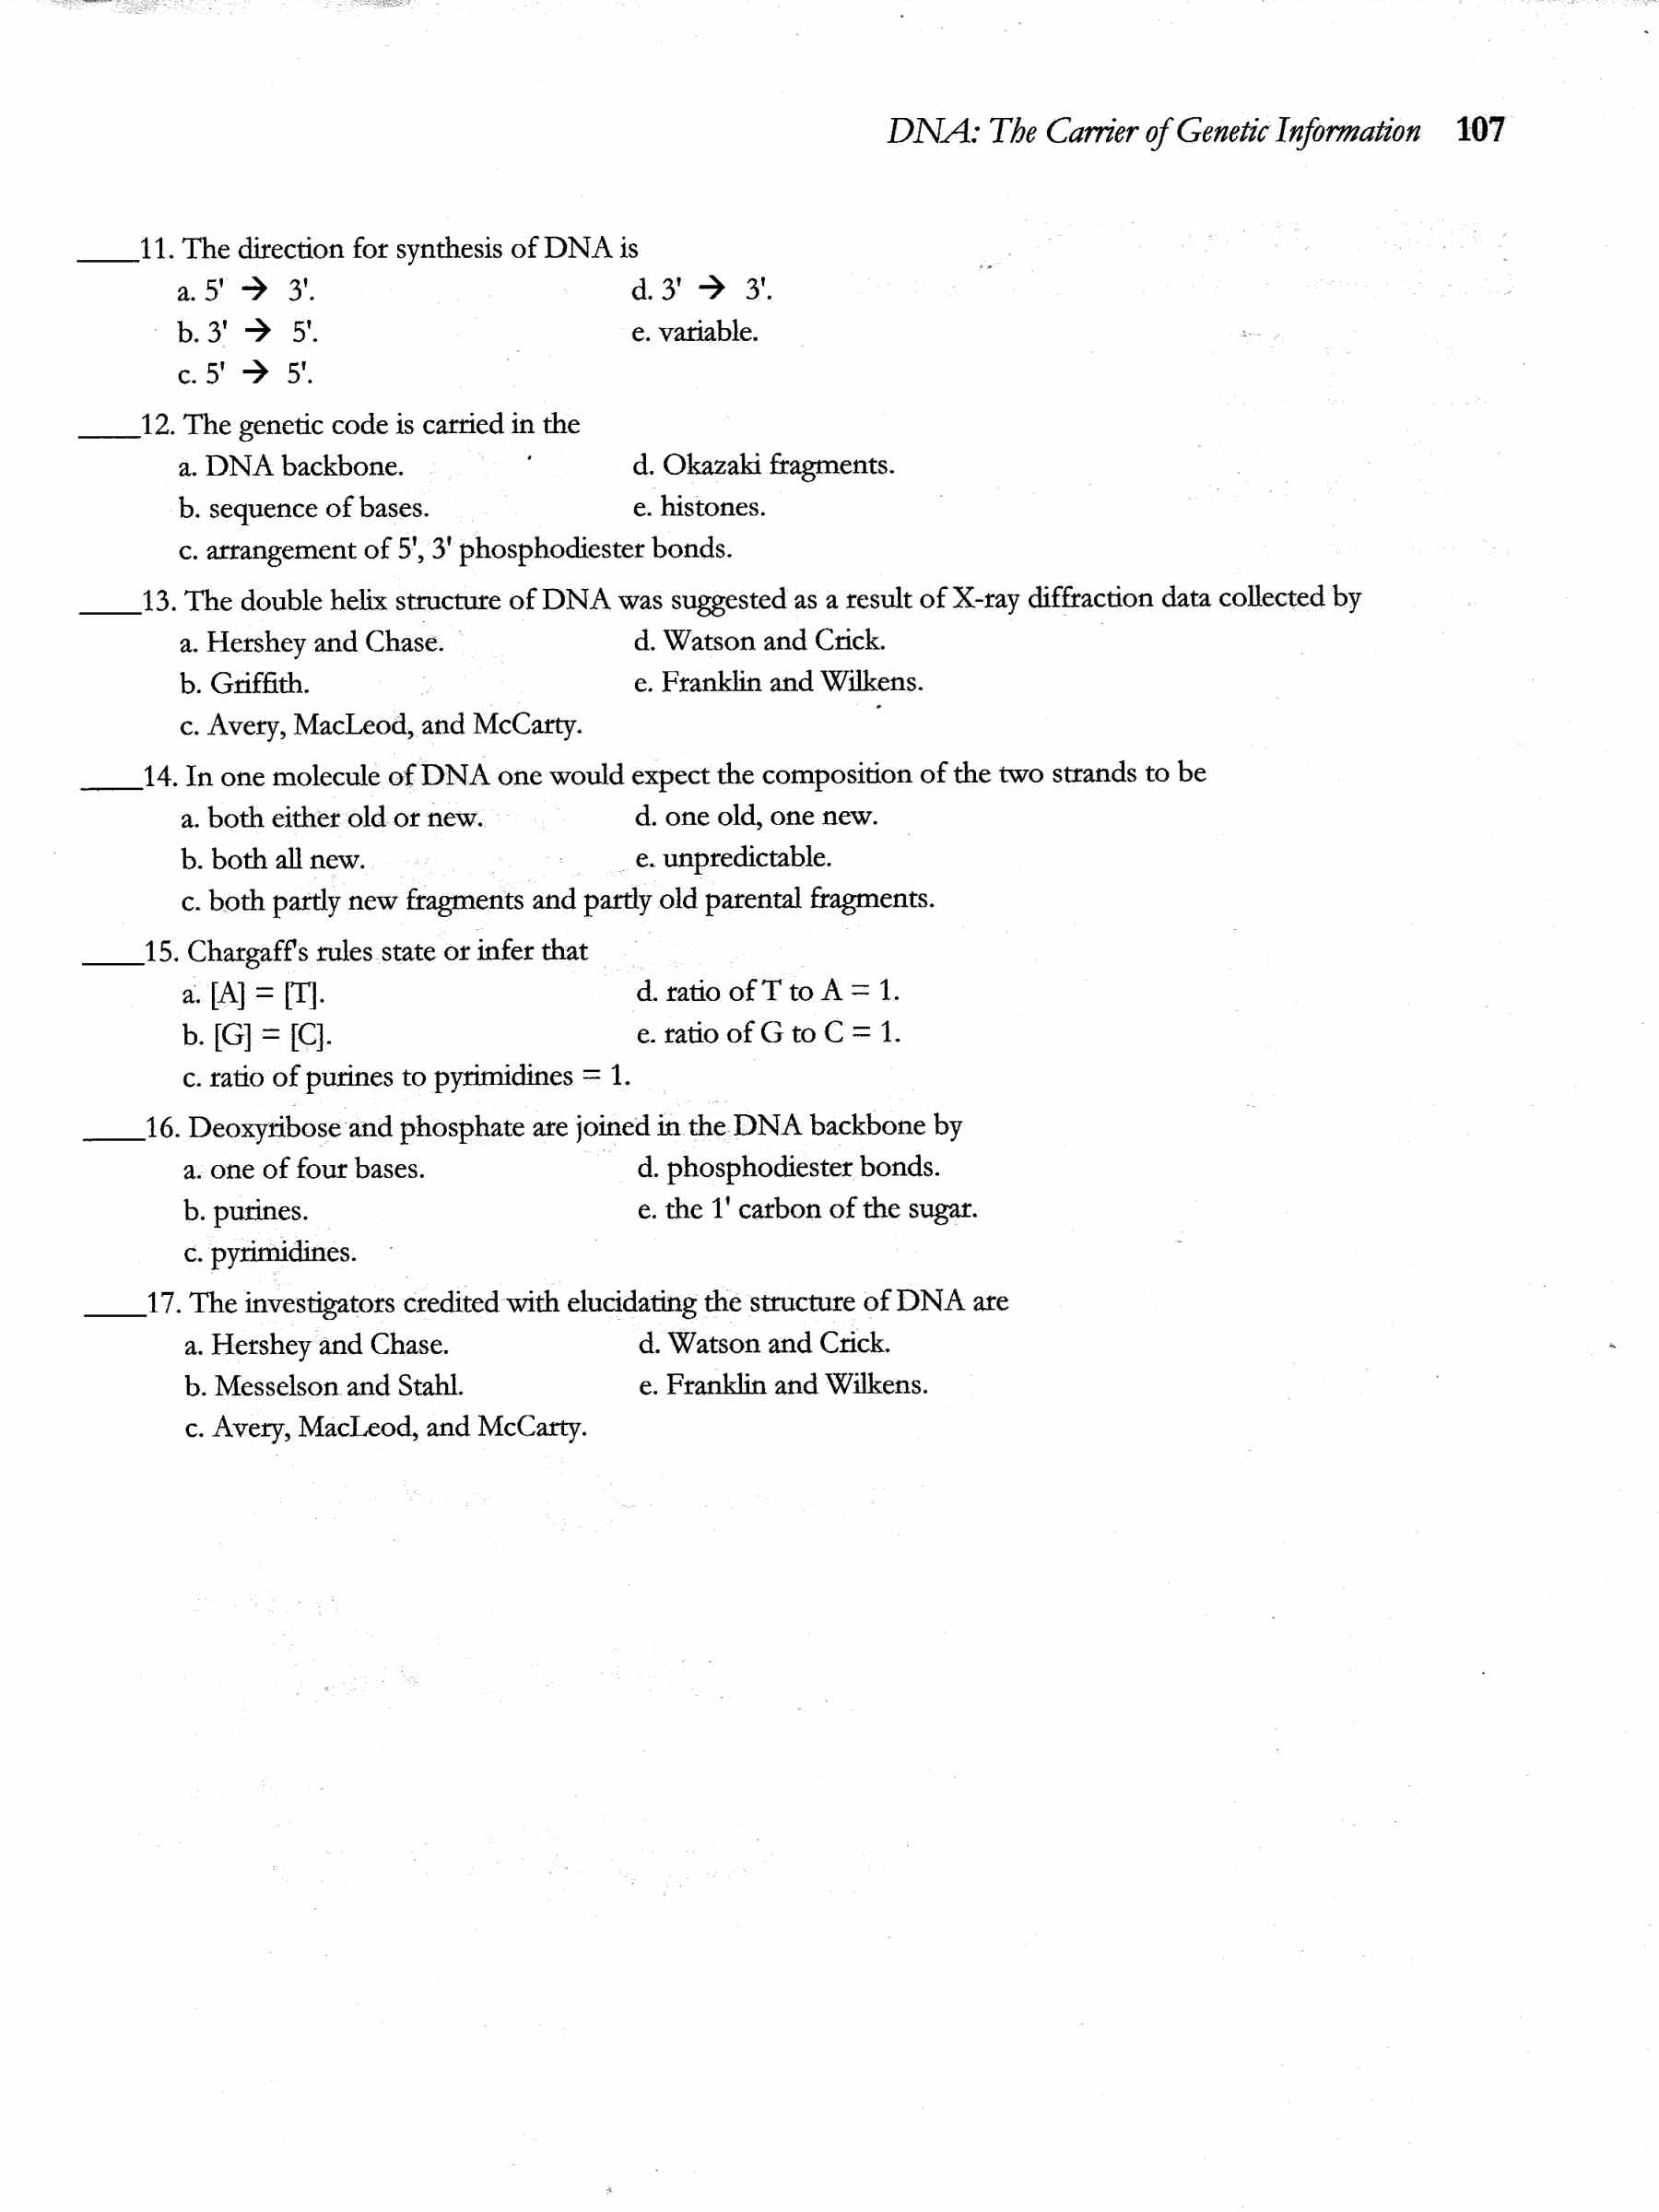 The DNA Double Helix Worksheet Answer Key Image